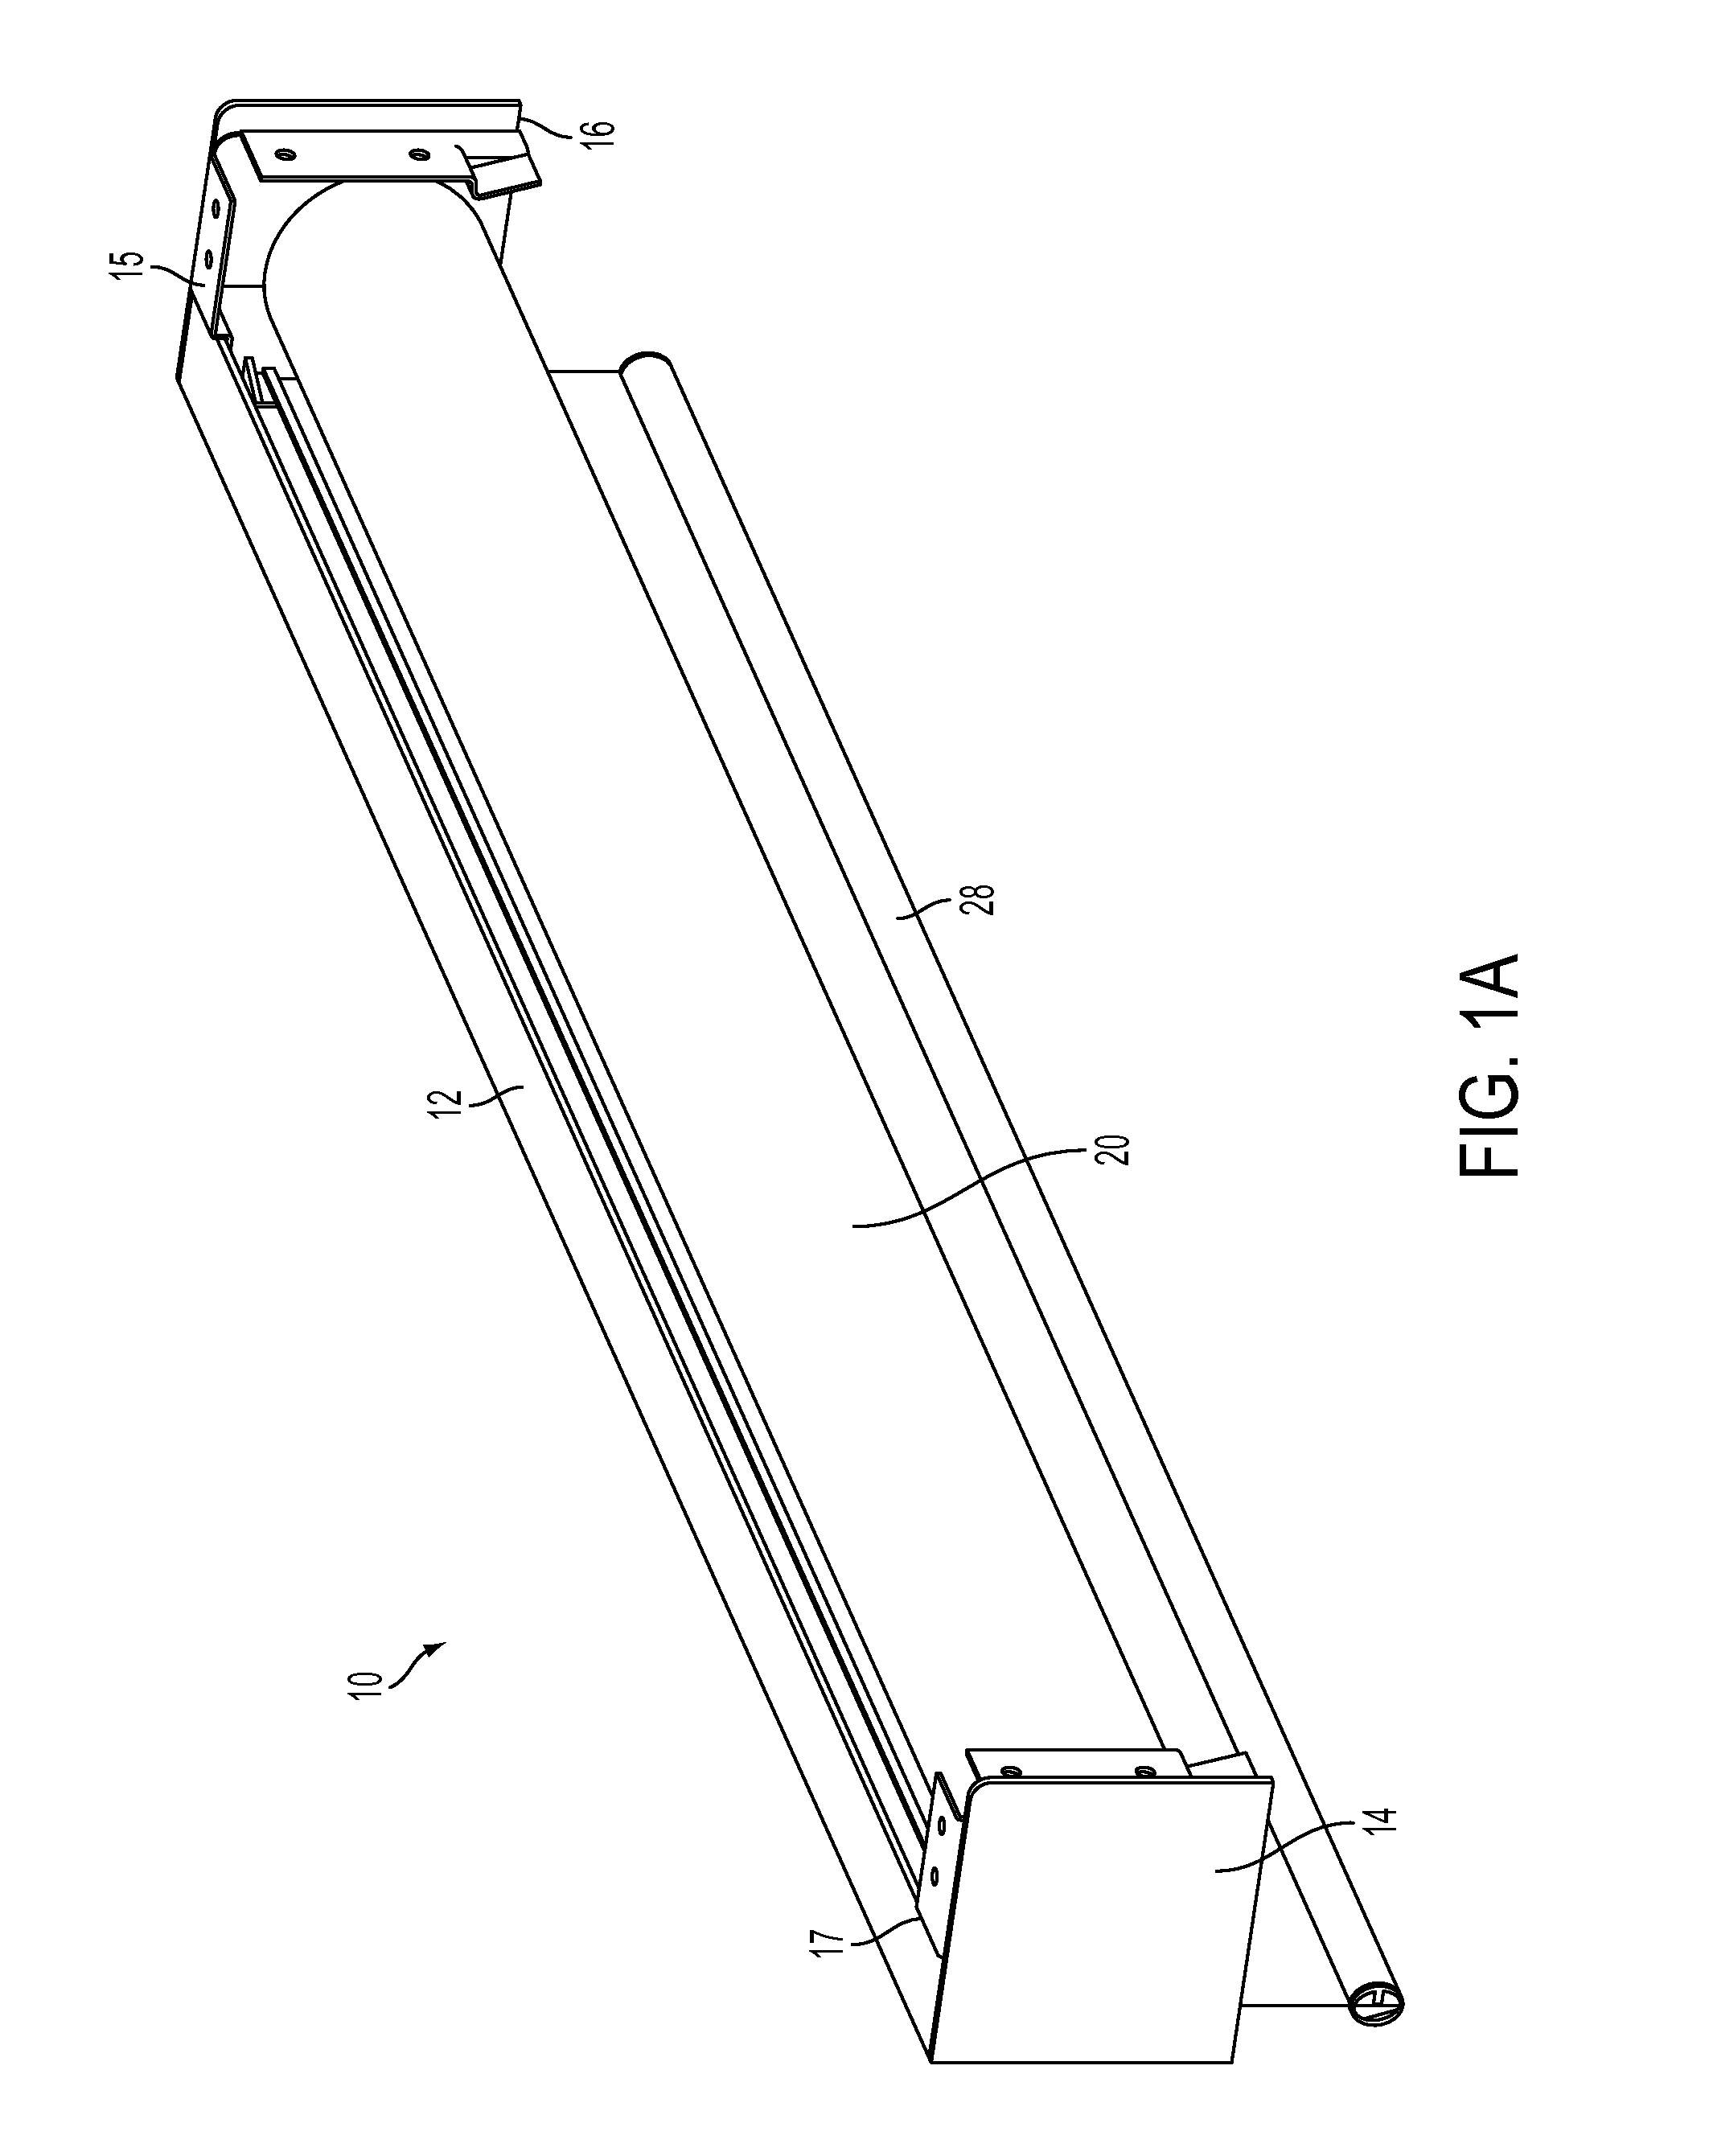 Method for Operating a Motorized Roller Shade